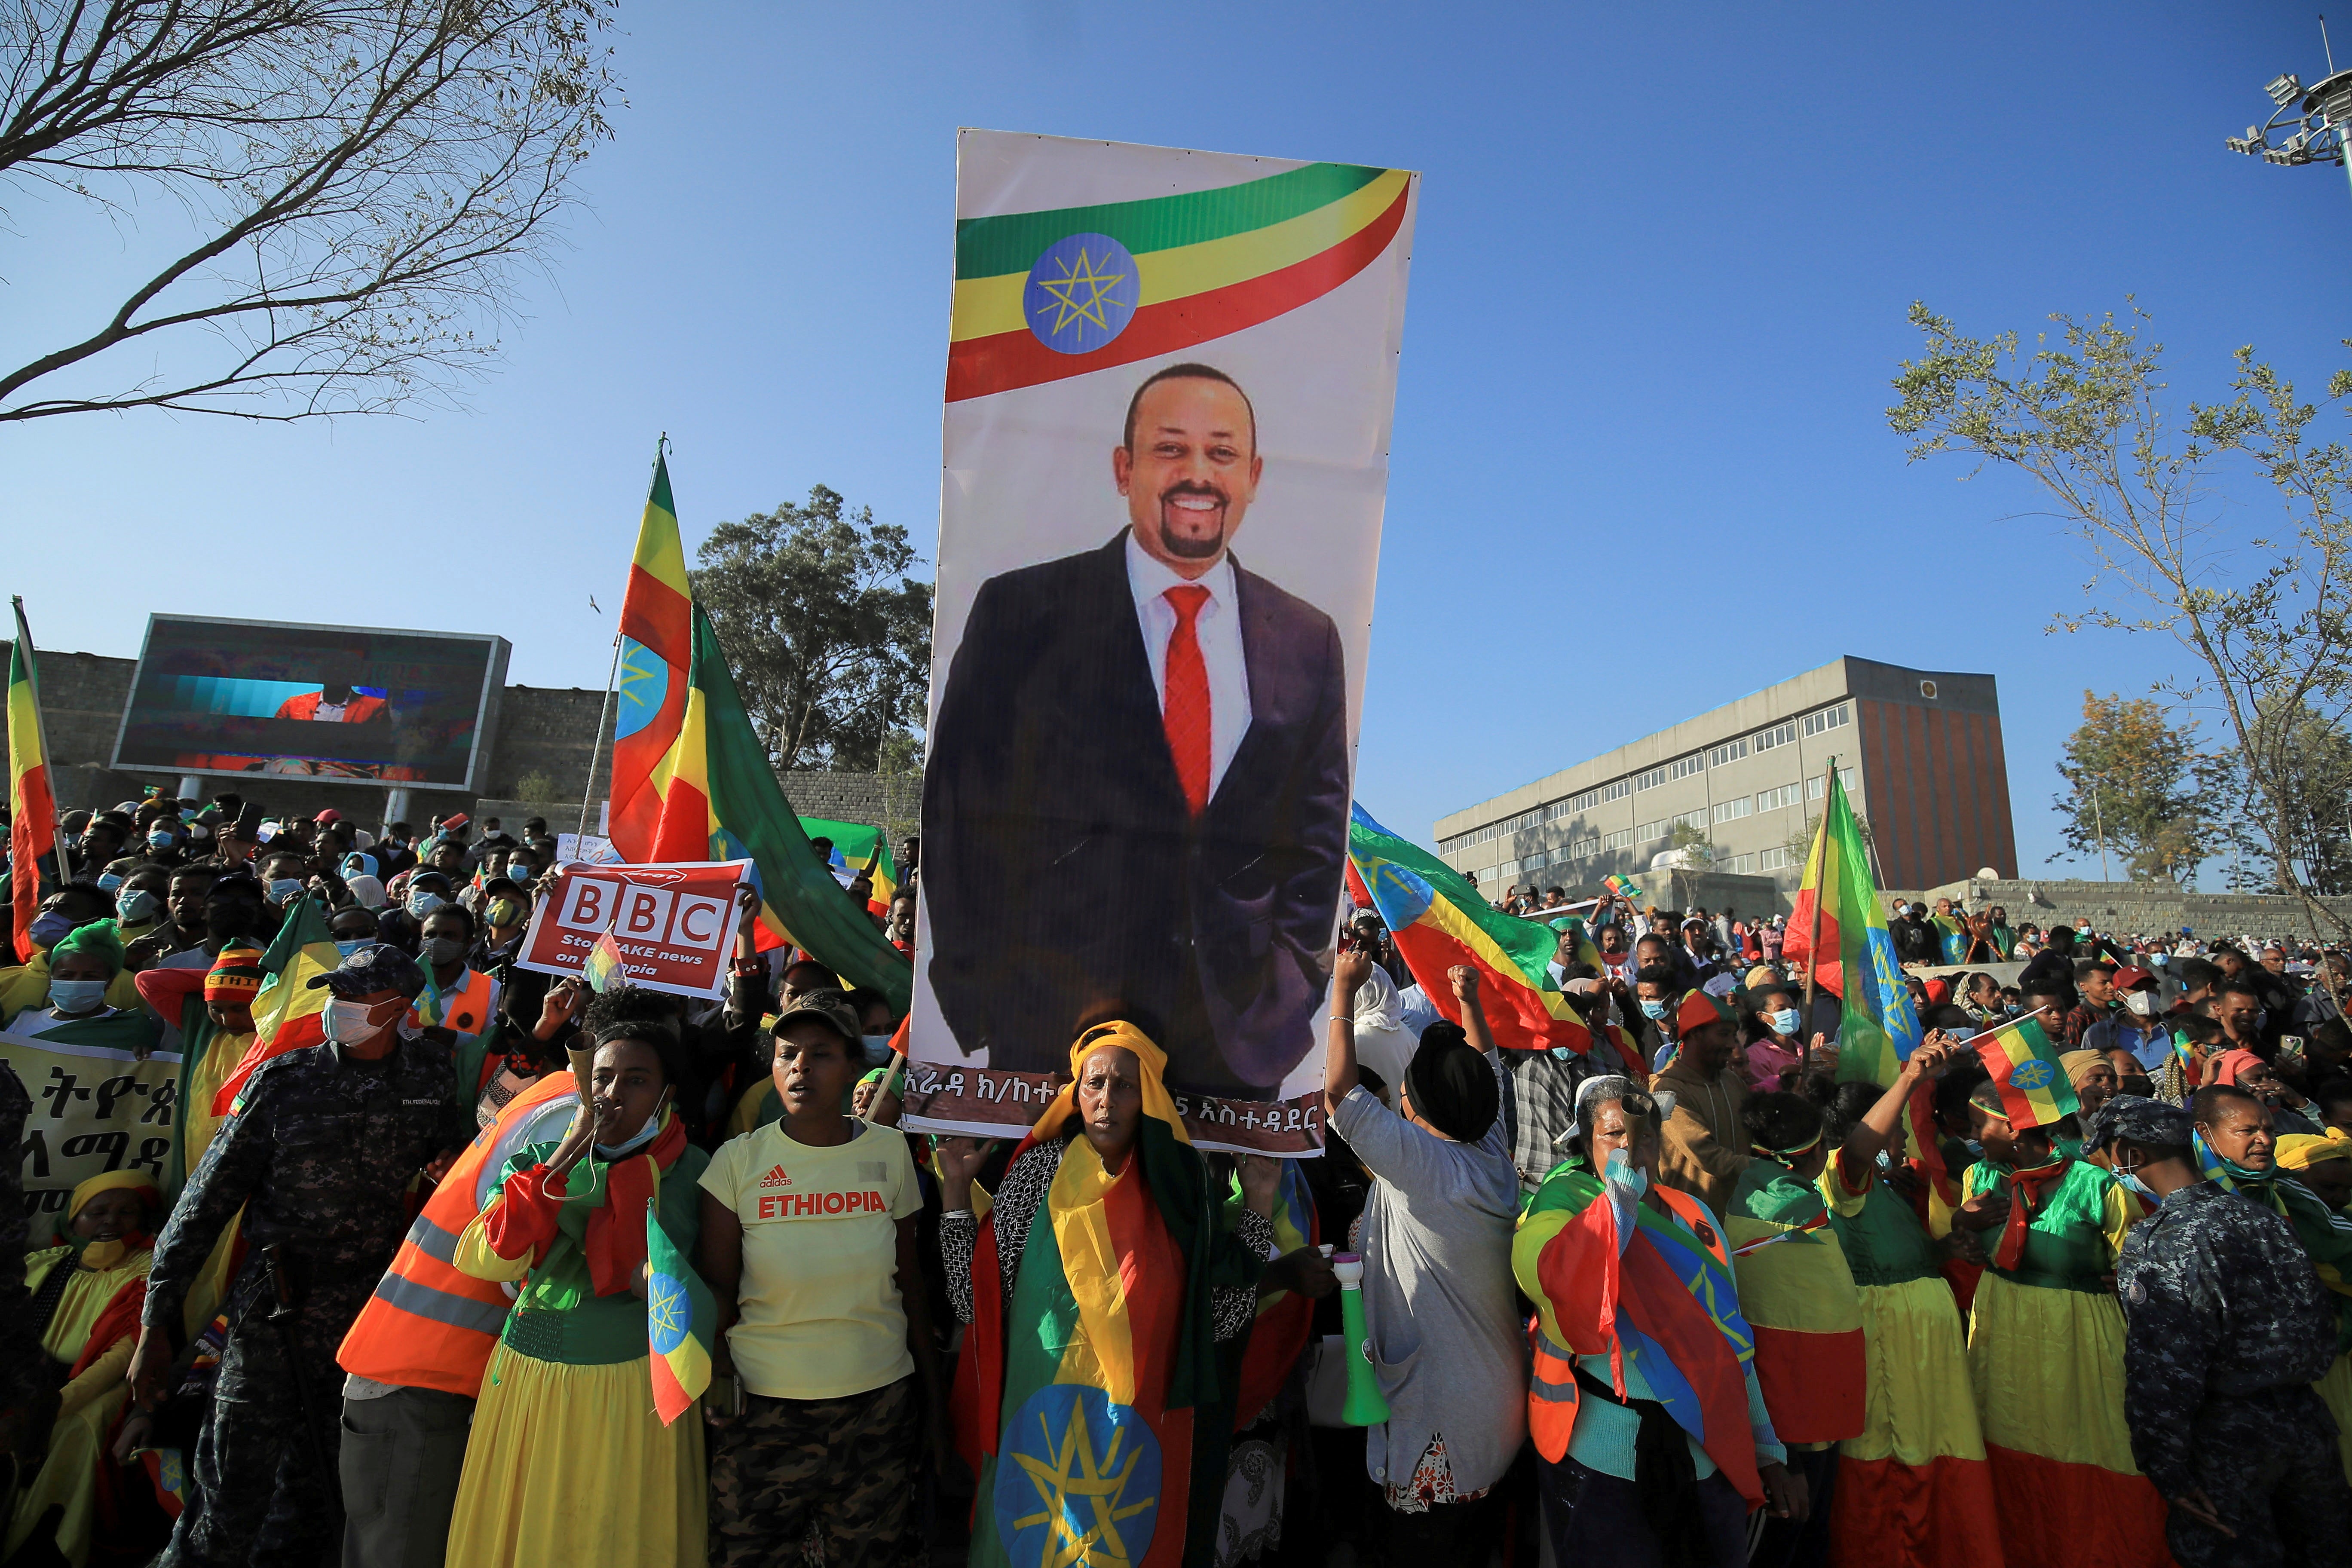 Civilians carry a placard with Prime Minister Abiy Ahmed’s portrait during a pro-government rally